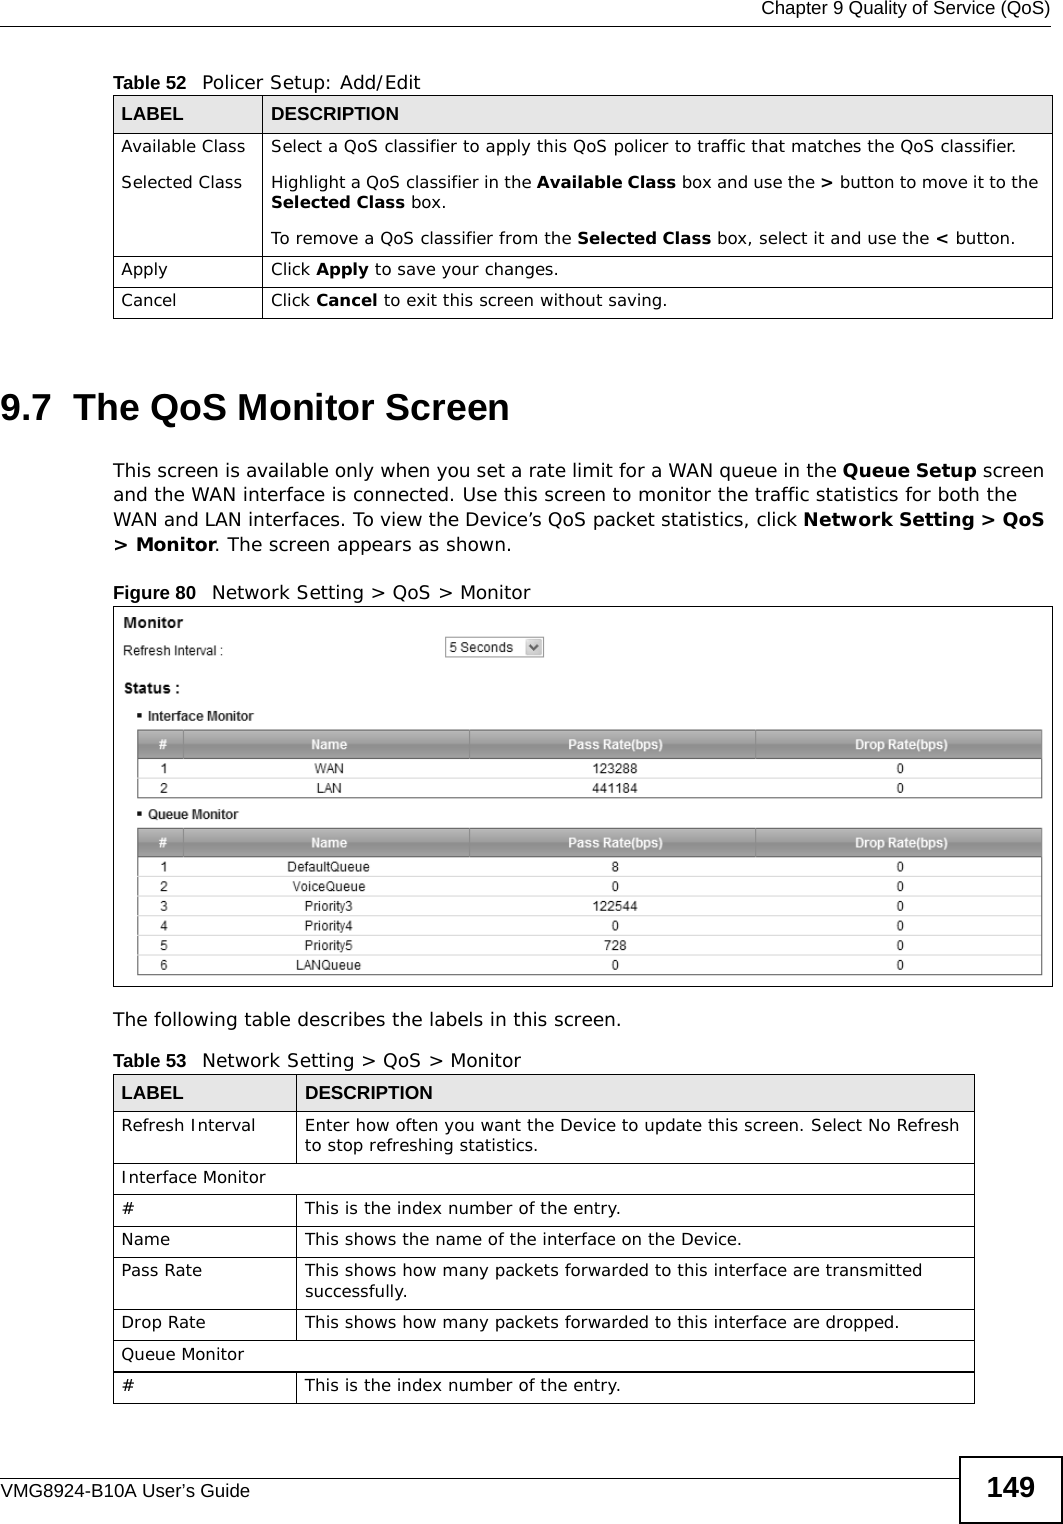  Chapter 9 Quality of Service (QoS)VMG8924-B10A User’s Guide 1499.7  The QoS Monitor Screen This screen is available only when you set a rate limit for a WAN queue in the Queue Setup screen and the WAN interface is connected. Use this screen to monitor the traffic statistics for both the WAN and LAN interfaces. To view the Device’s QoS packet statistics, click Network Setting &gt; QoS &gt; Monitor. The screen appears as shown. Figure 80   Network Setting &gt; QoS &gt; Monitor The following table describes the labels in this screen.  Available ClassSelected Class Select a QoS classifier to apply this QoS policer to traffic that matches the QoS classifier.Highlight a QoS classifier in the Available Class box and use the &gt; button to move it to the Selected Class box.To remove a QoS classifier from the Selected Class box, select it and use the &lt; button.Apply Click Apply to save your changes.Cancel Click Cancel to exit this screen without saving.Table 52   Policer Setup: Add/EditLABEL DESCRIPTIONTable 53   Network Setting &gt; QoS &gt; MonitorLABEL DESCRIPTIONRefresh Interval Enter how often you want the Device to update this screen. Select No Refresh to stop refreshing statistics.Interface Monitor# This is the index number of the entry.Name This shows the name of the interface on the Device. Pass Rate This shows how many packets forwarded to this interface are transmitted successfully.Drop Rate This shows how many packets forwarded to this interface are dropped.Queue Monitor# This is the index number of the entry.